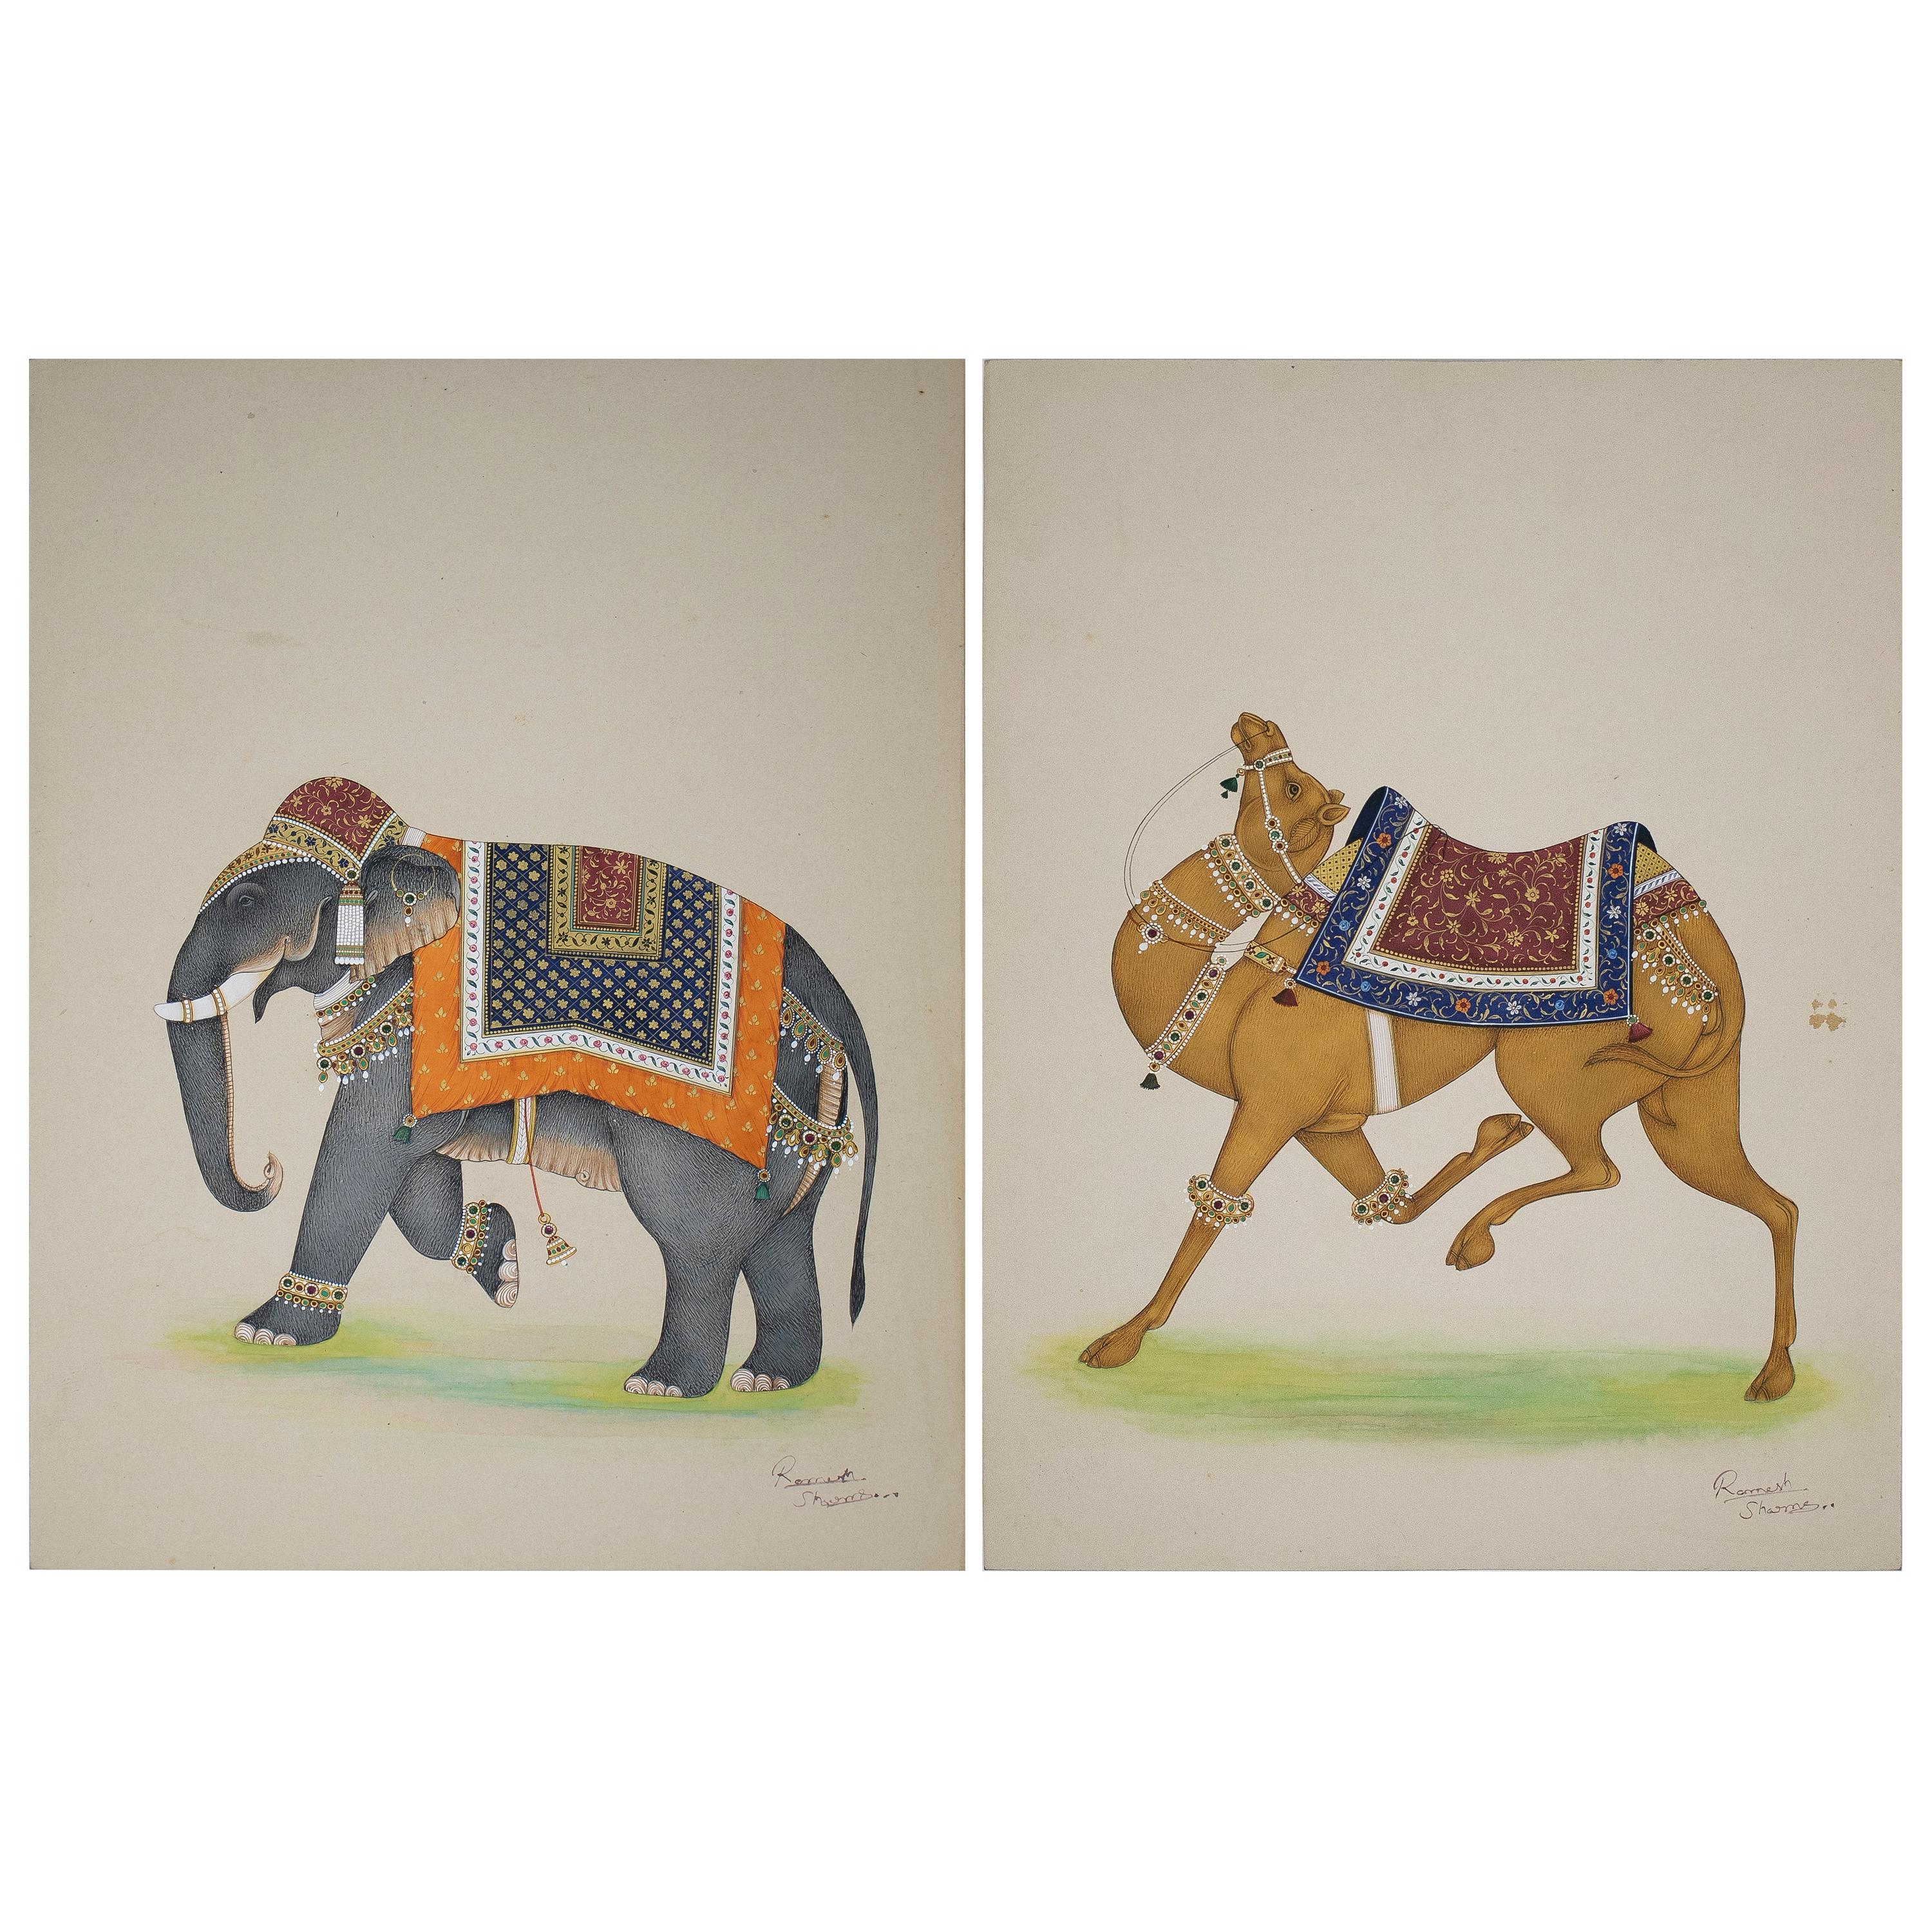 Ramesh Shames, Indian Pair of Elephant and Camel Paper Drawings, 1970s